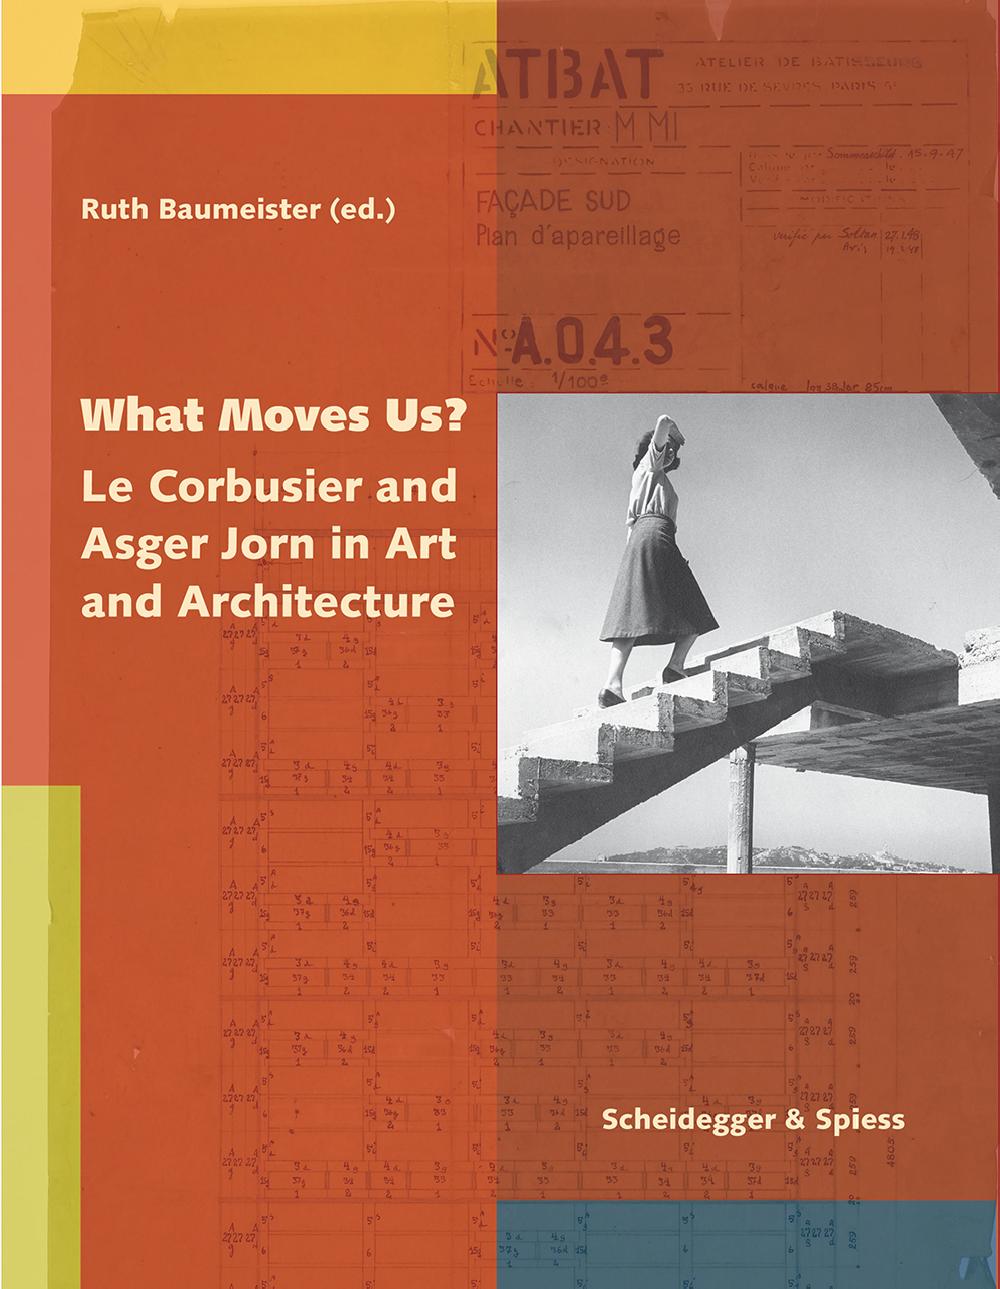 What move us? Le Corbusier and Asger Jorn in Art and Architecture